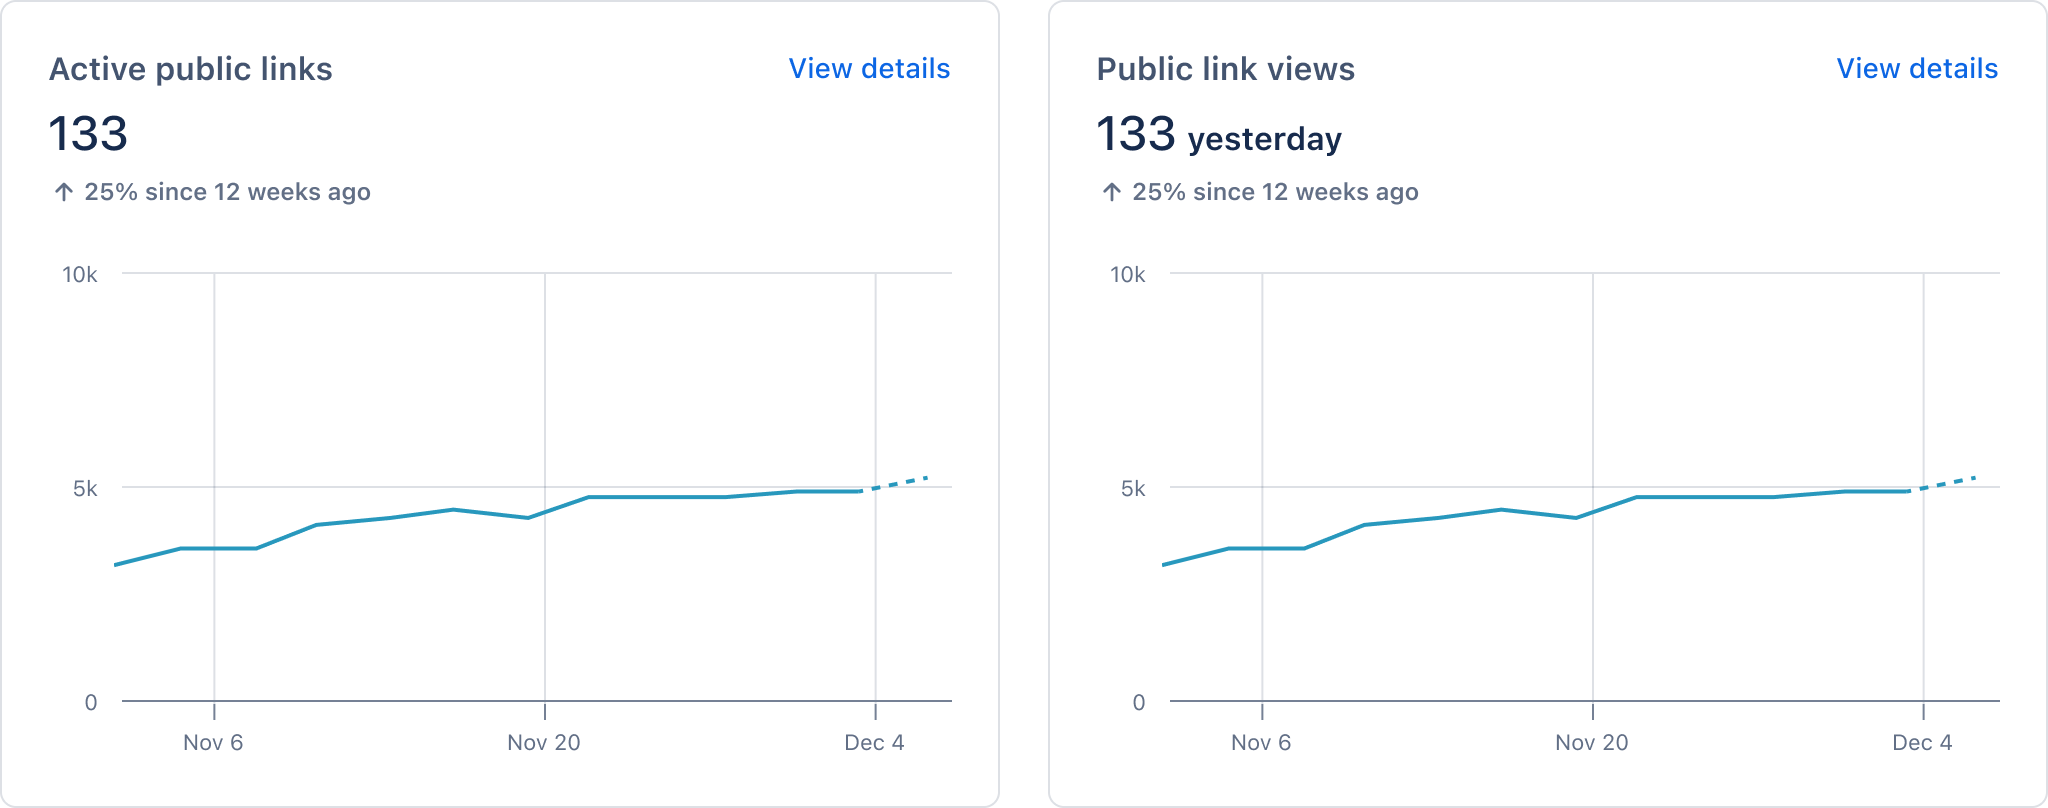 Two dashboards show the total count and graphs of active public links and their views yesterday. Each links to View details.